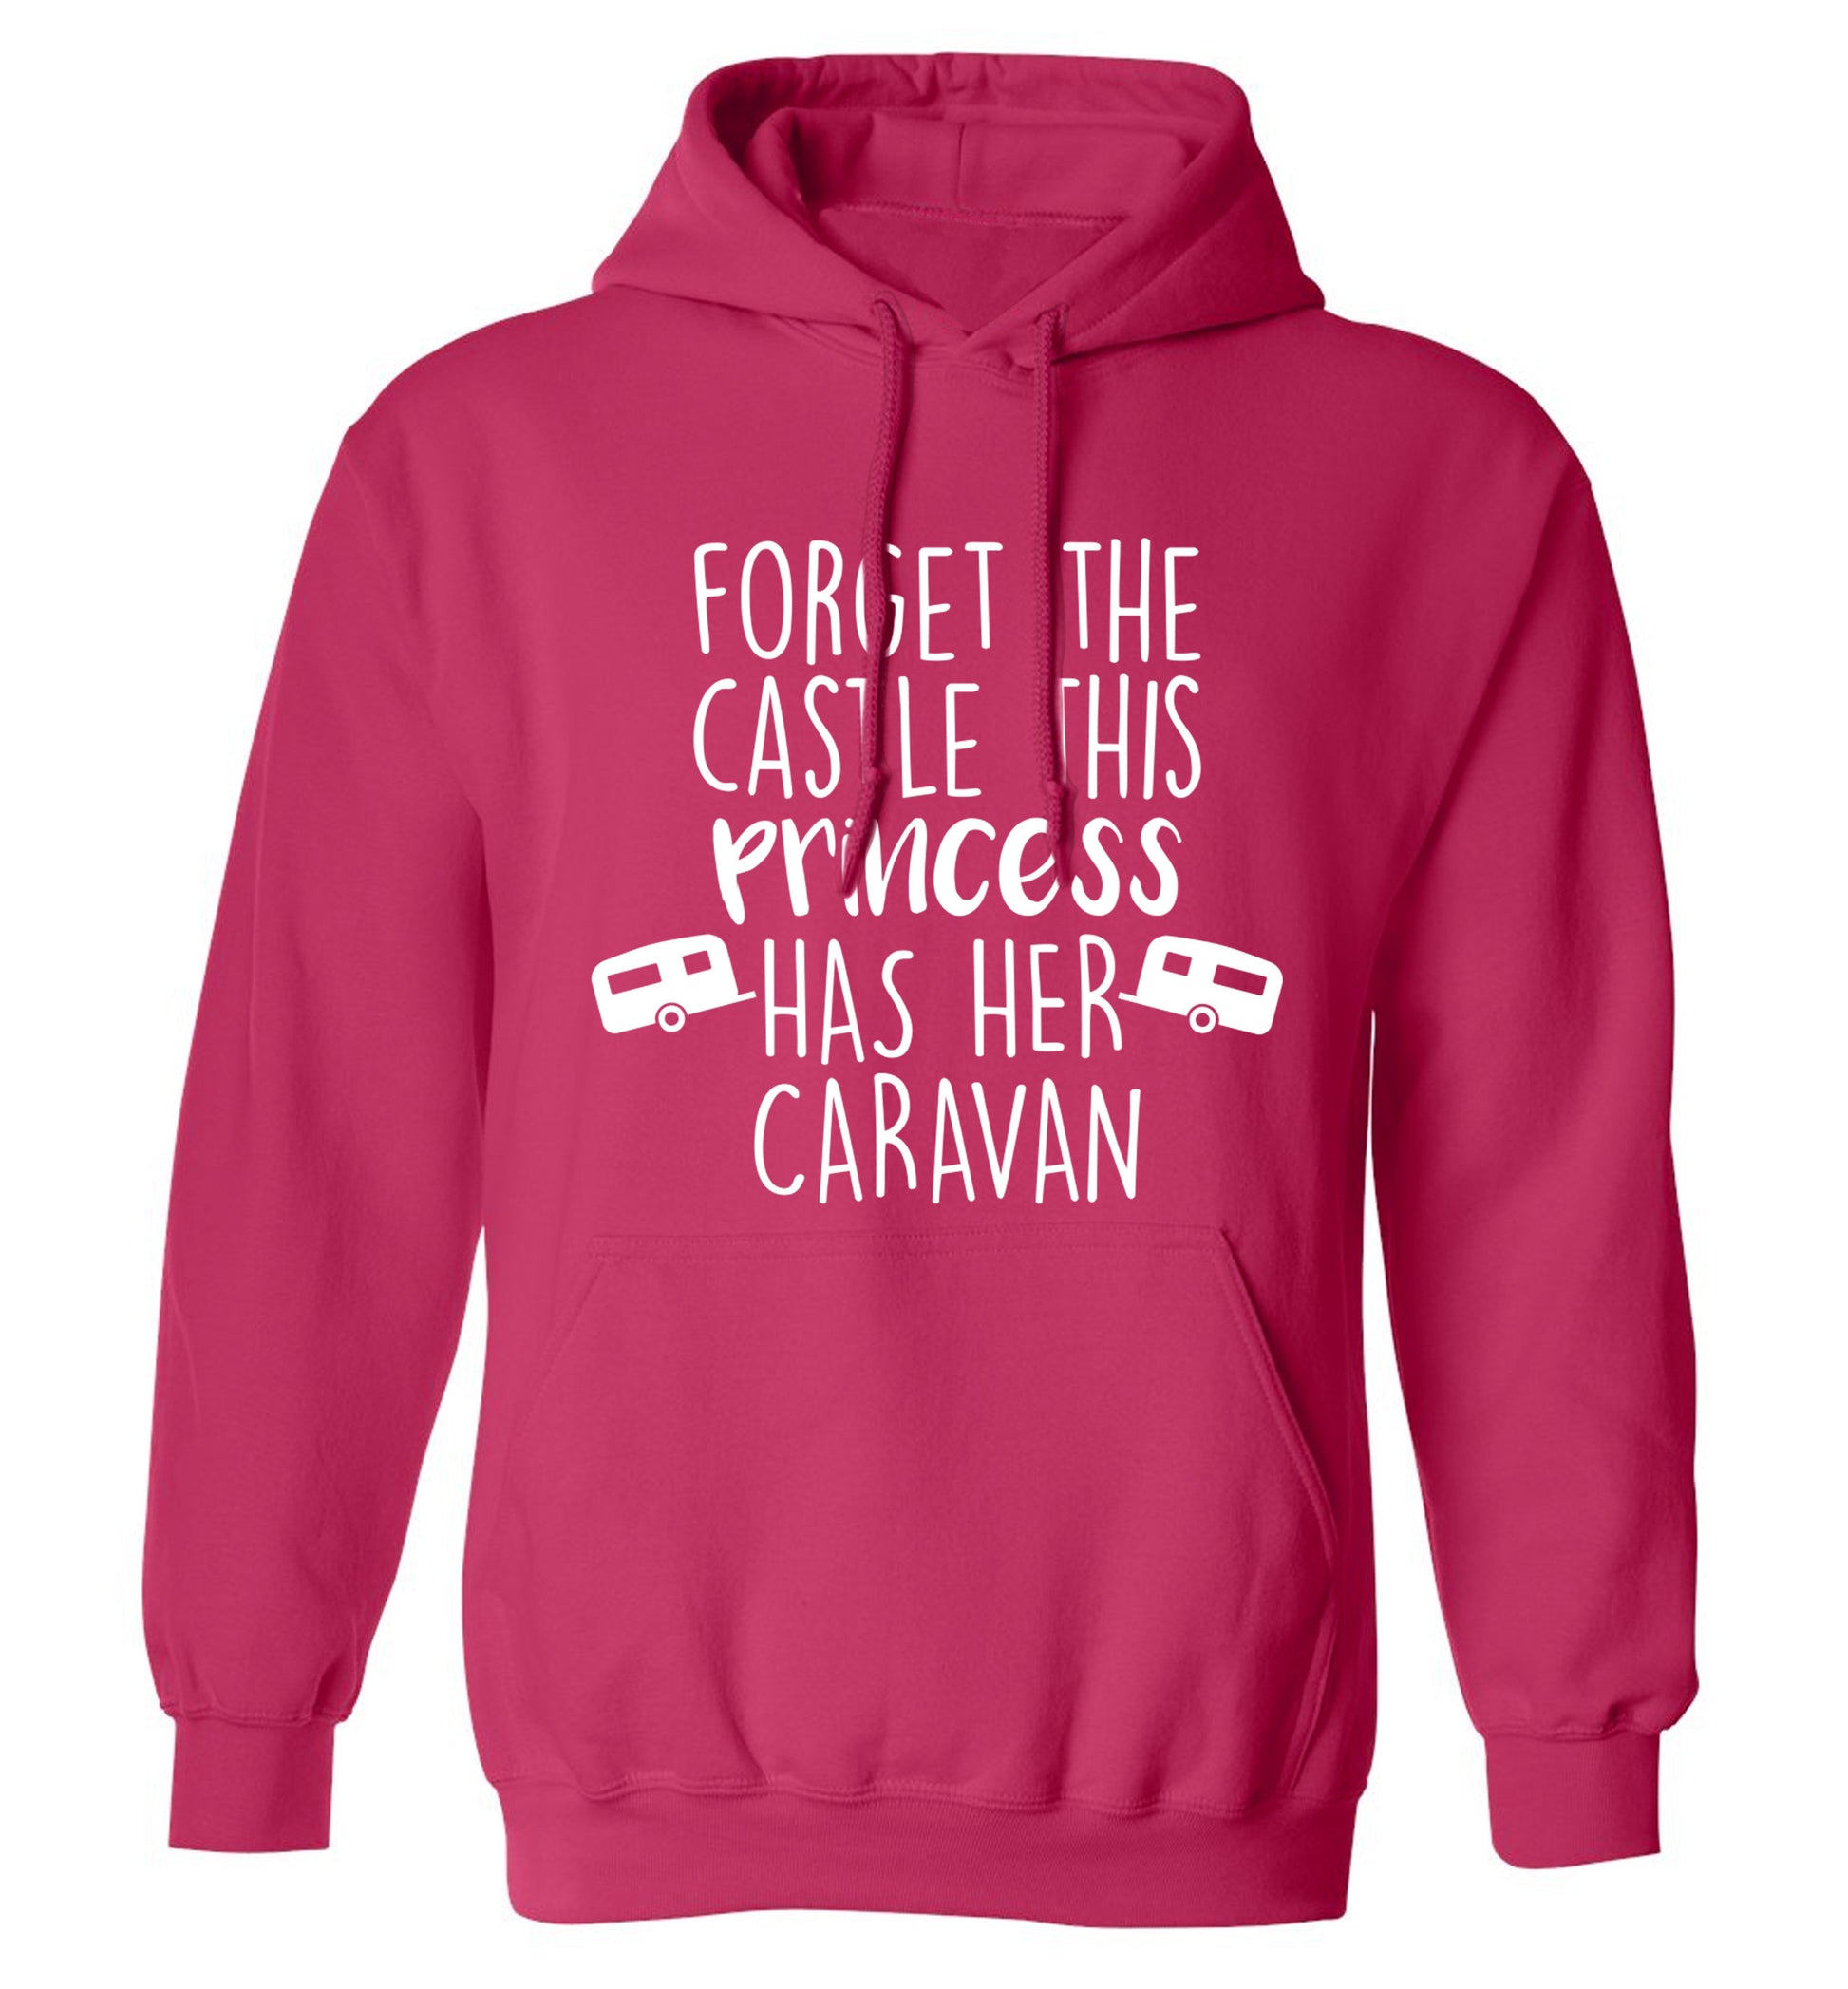 Forget the castle this princess lives at the caravan adults unisex pink hoodie 2XL